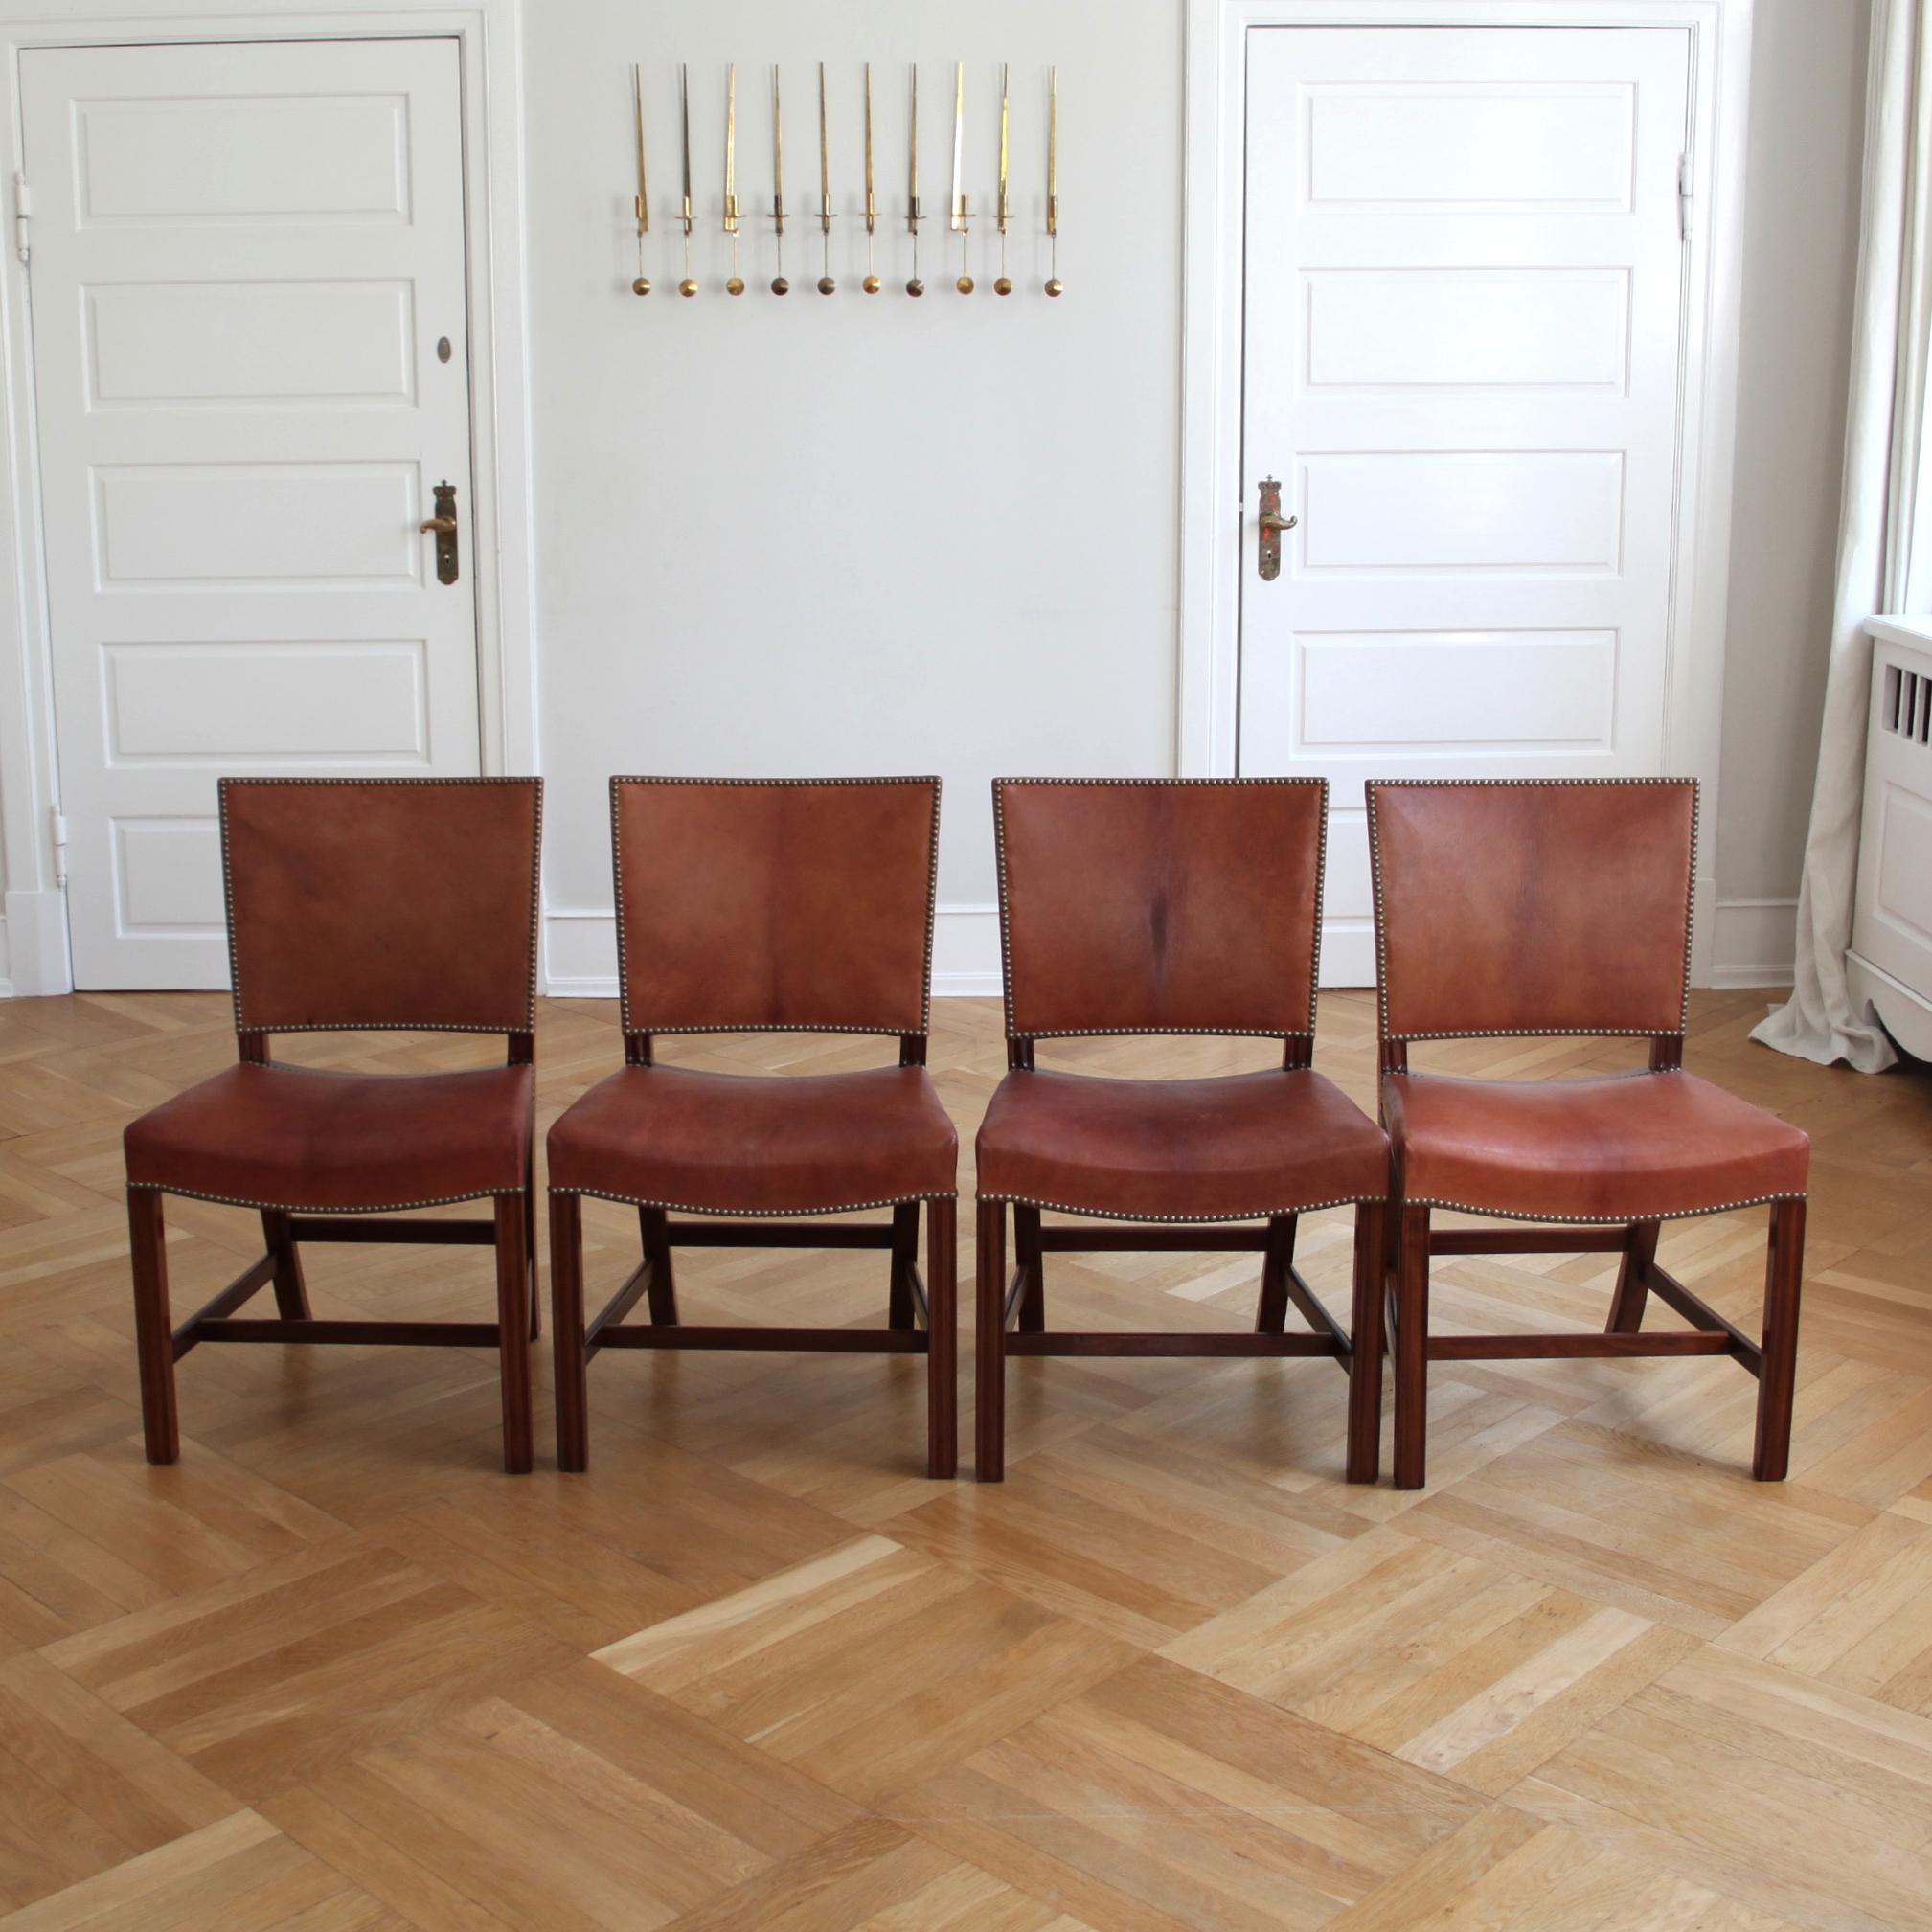 Oiled Set of 14 Kaare Klint Red Chairs, Niger Leather, Mahogany